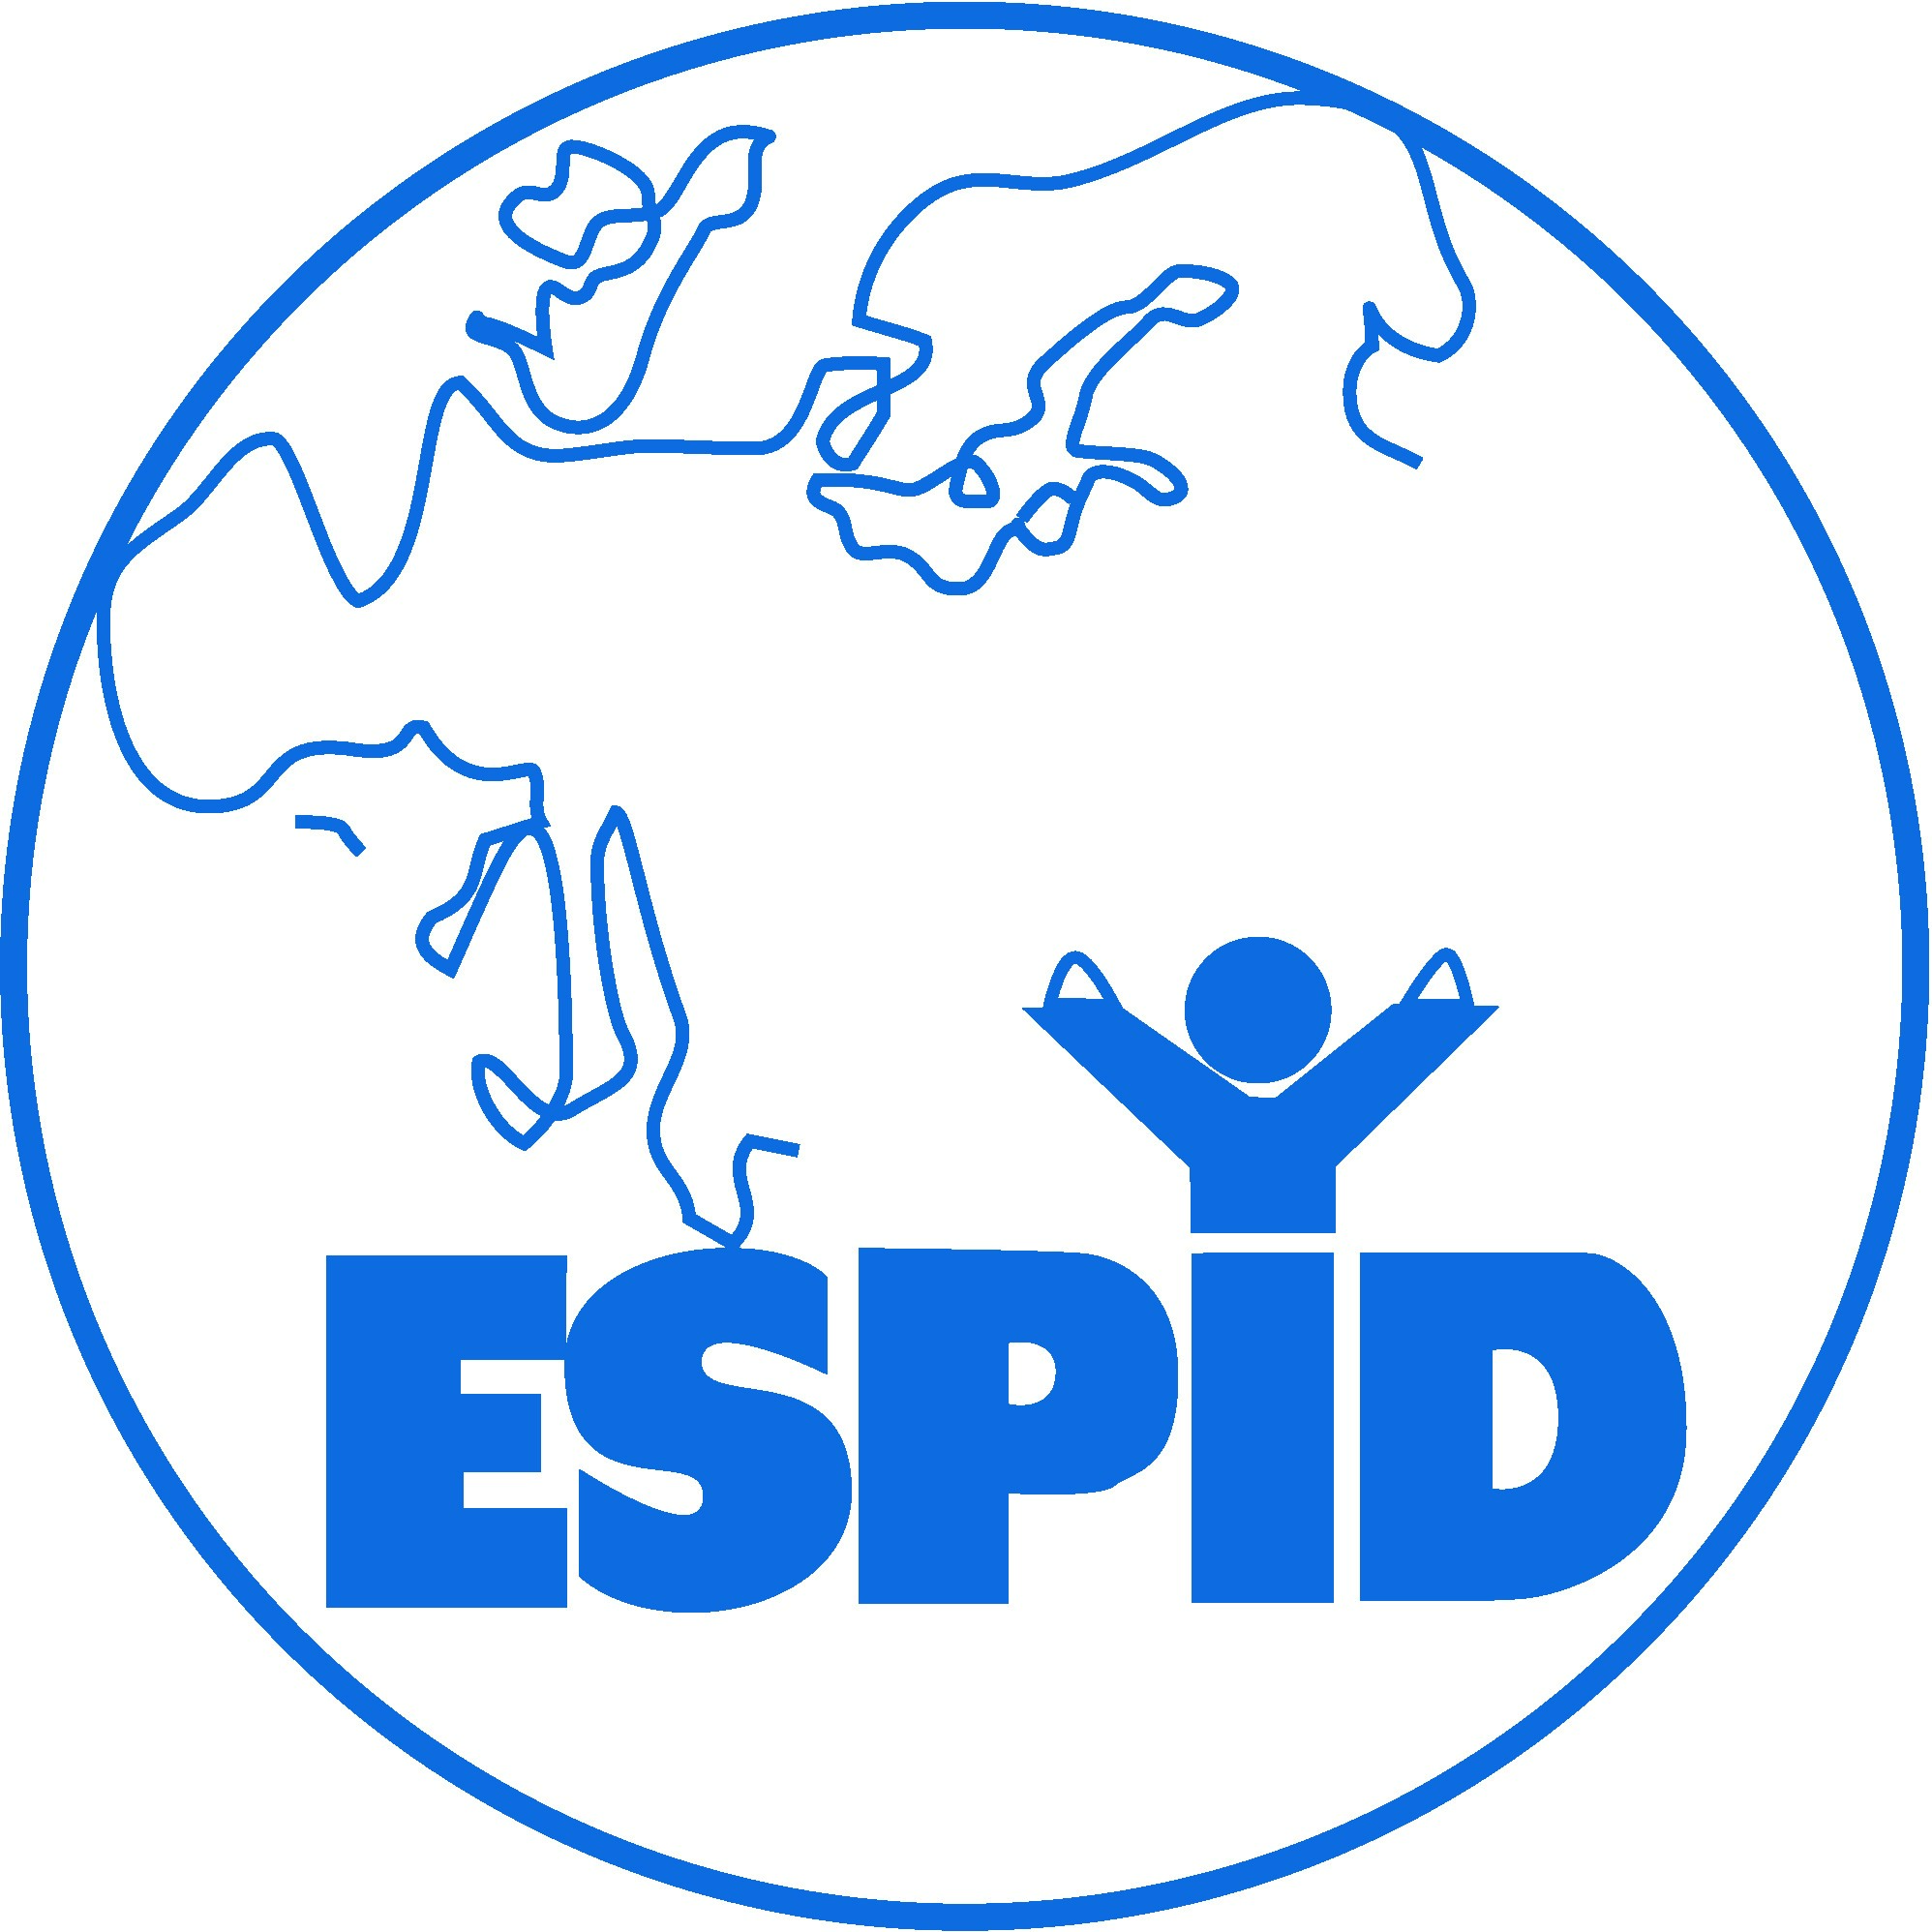 ESPID 2019 - The 37th Meeting of The European Society for Paediatric Infectious Diseases